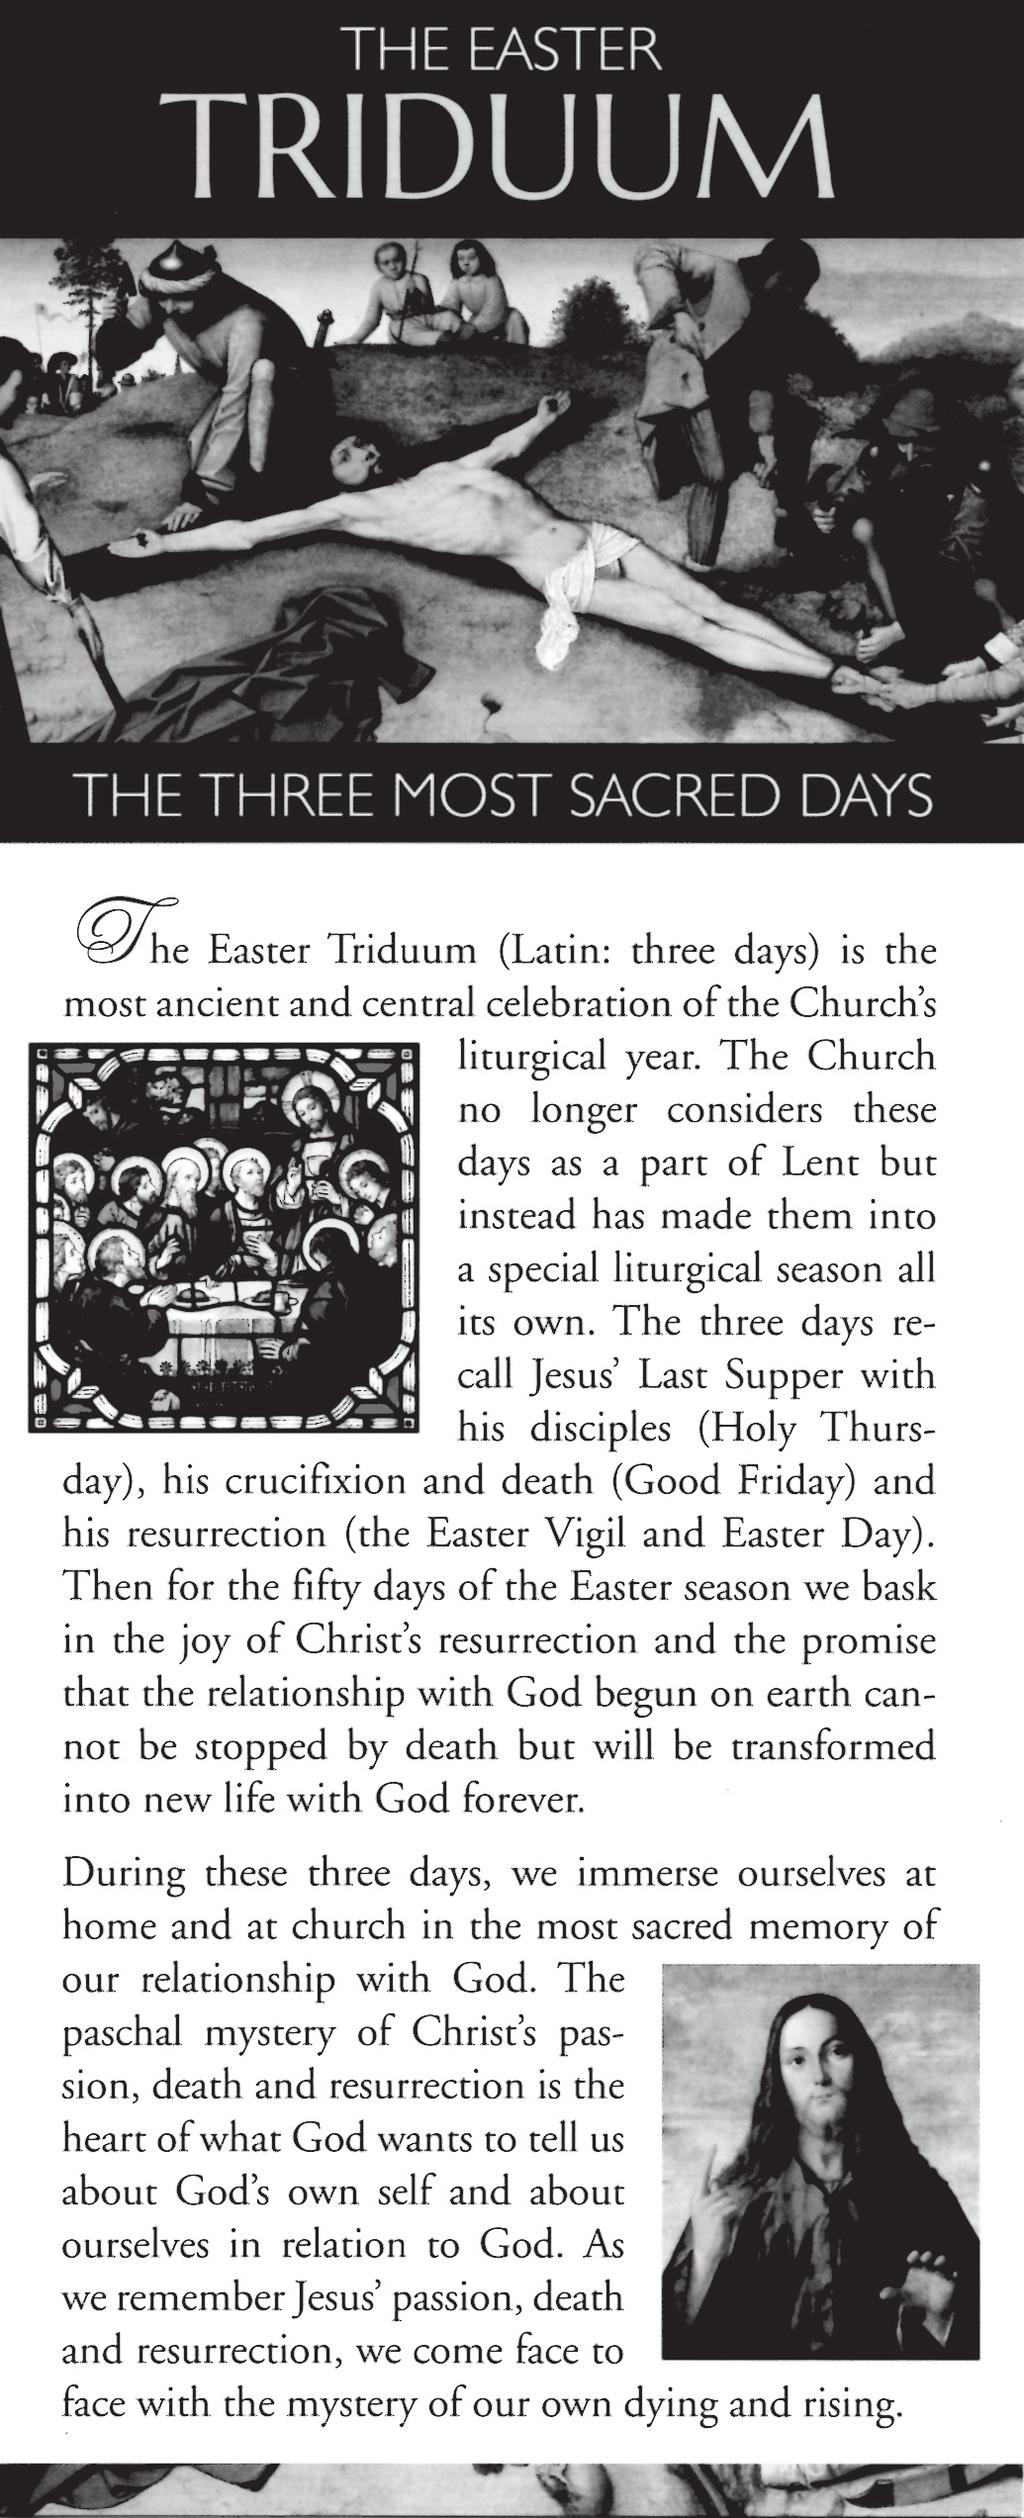 March 25, 2018 TRIDUUM PRAYER Almighty God, You gather your Church in solemn celebration ofthe mystery ofour Redemption.